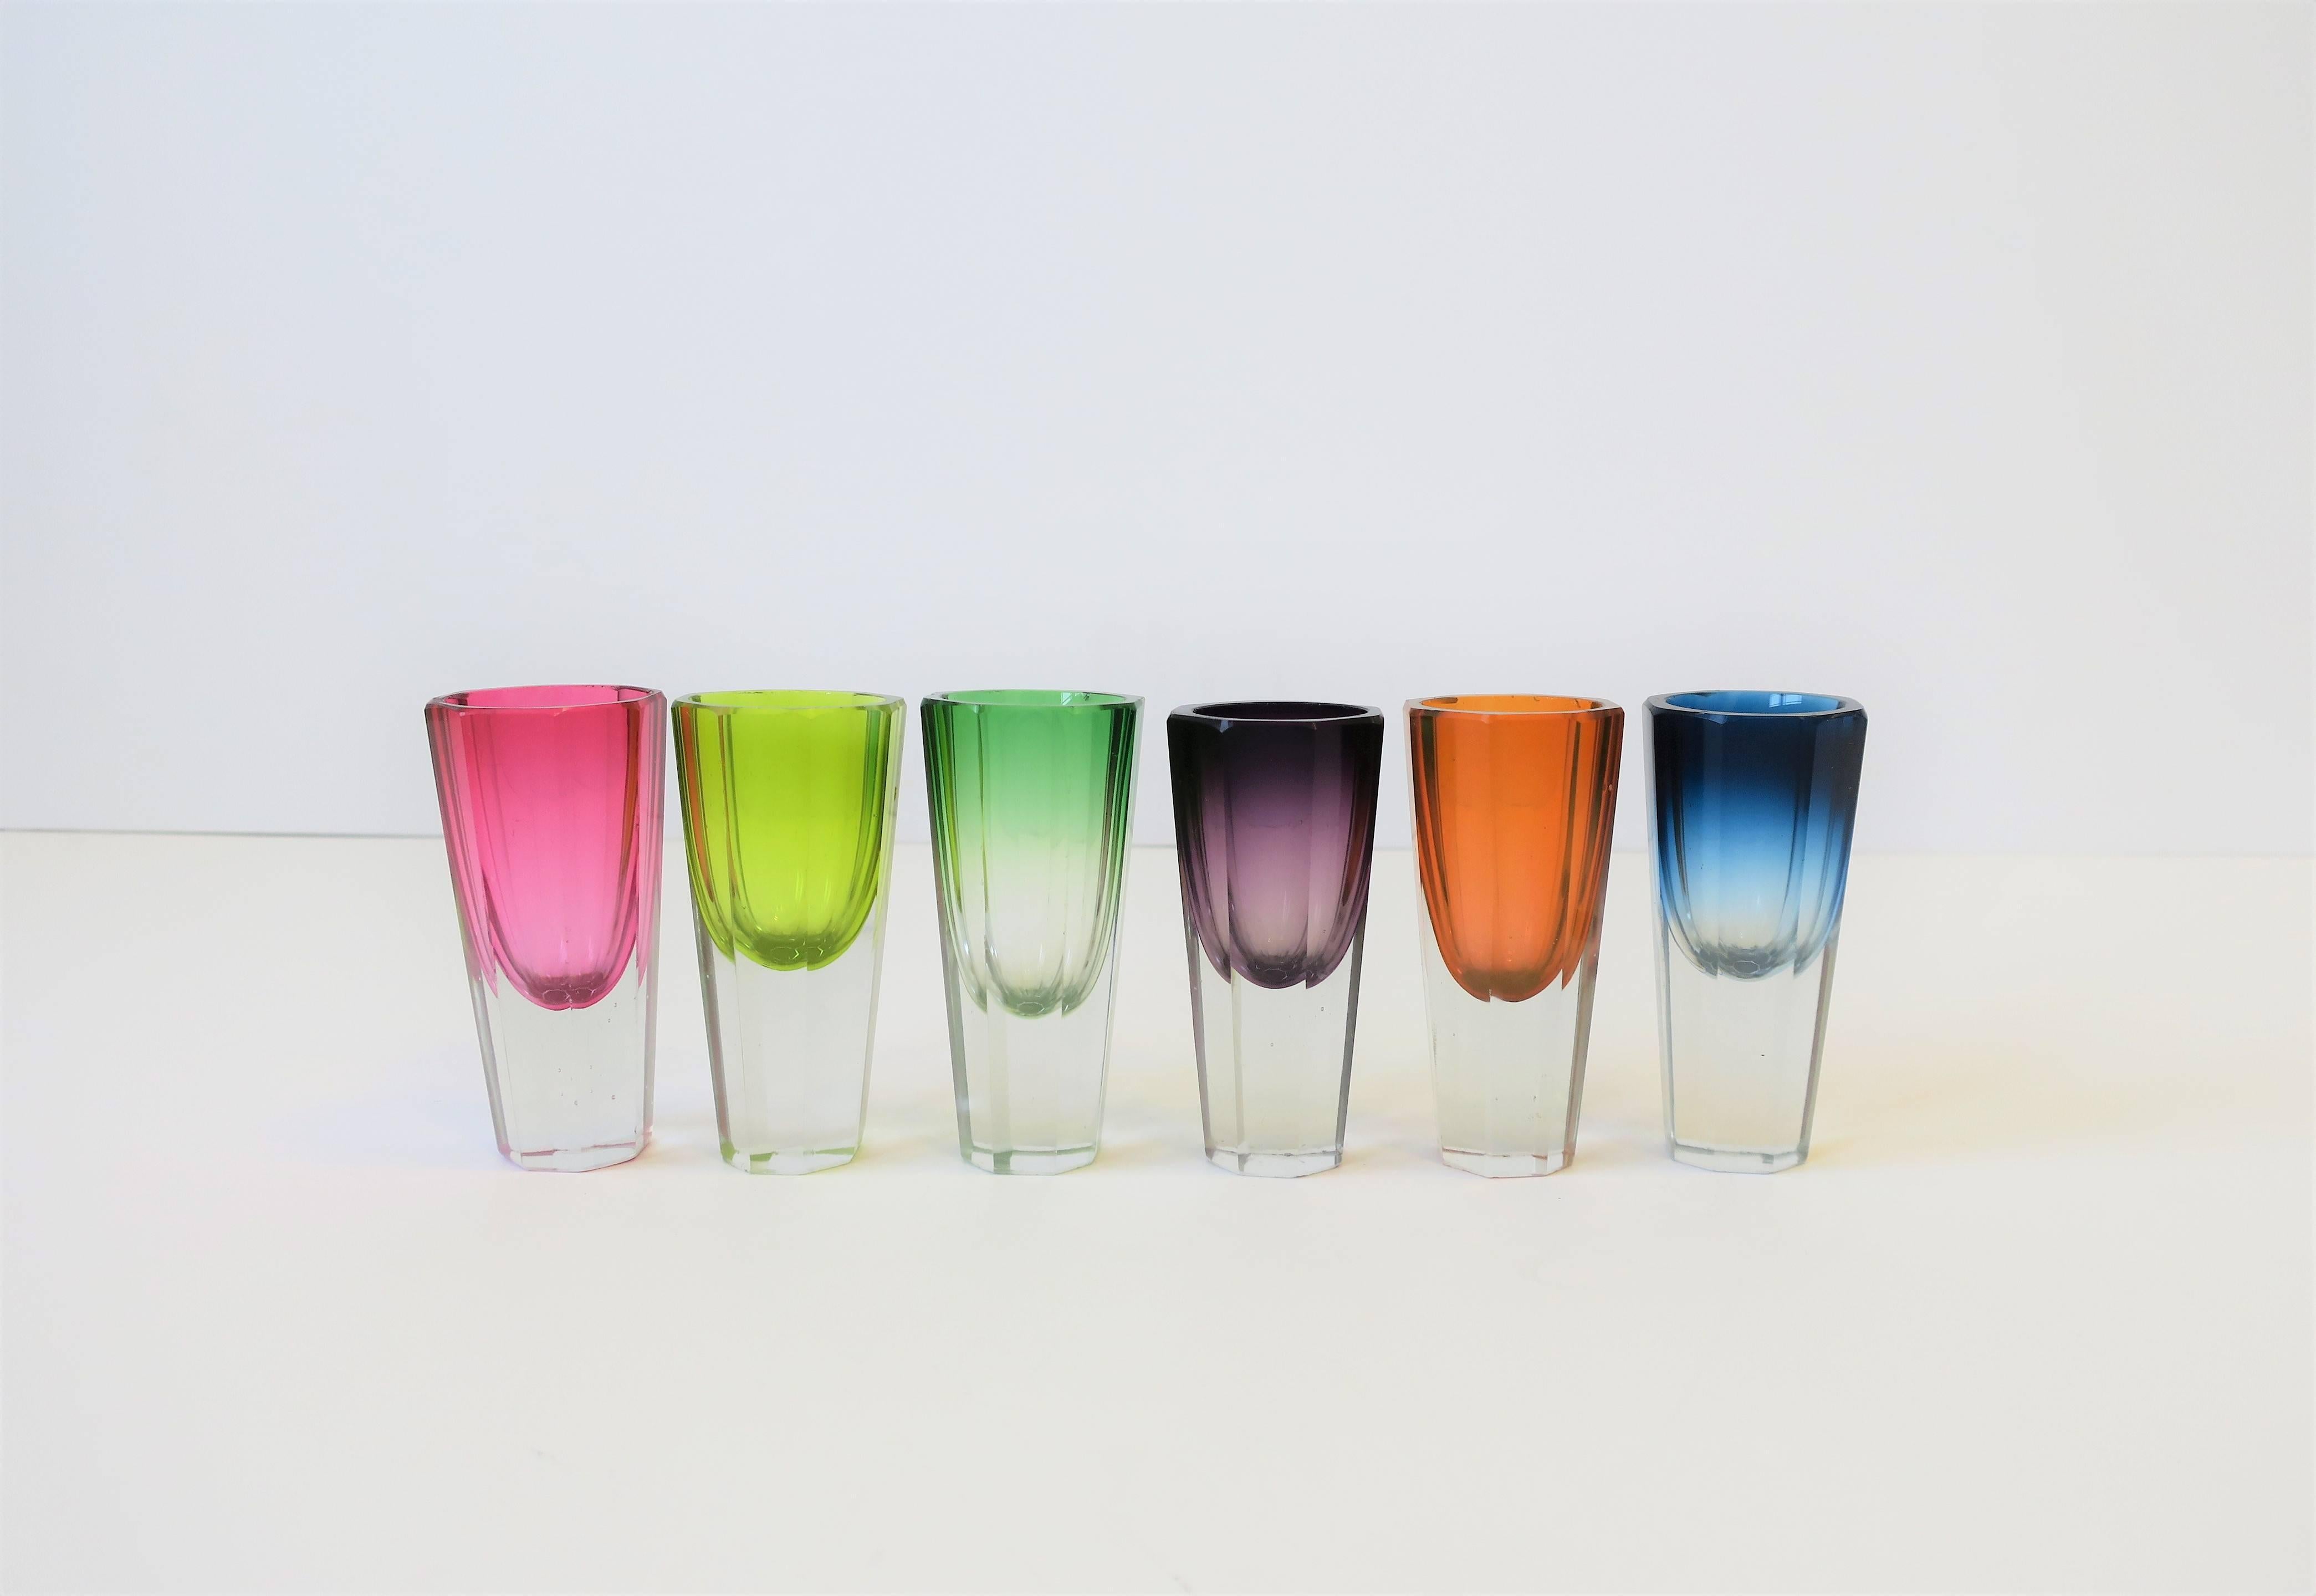 A very beautiful set of six (6) European Czech Bohemian clear and colorful octagonal crystal liquor or spirit shot glasses in a rainbow of colors, circa mid-20th century, Europe. These six (6) crystal shot glass, cut in an octagonal shape, are held